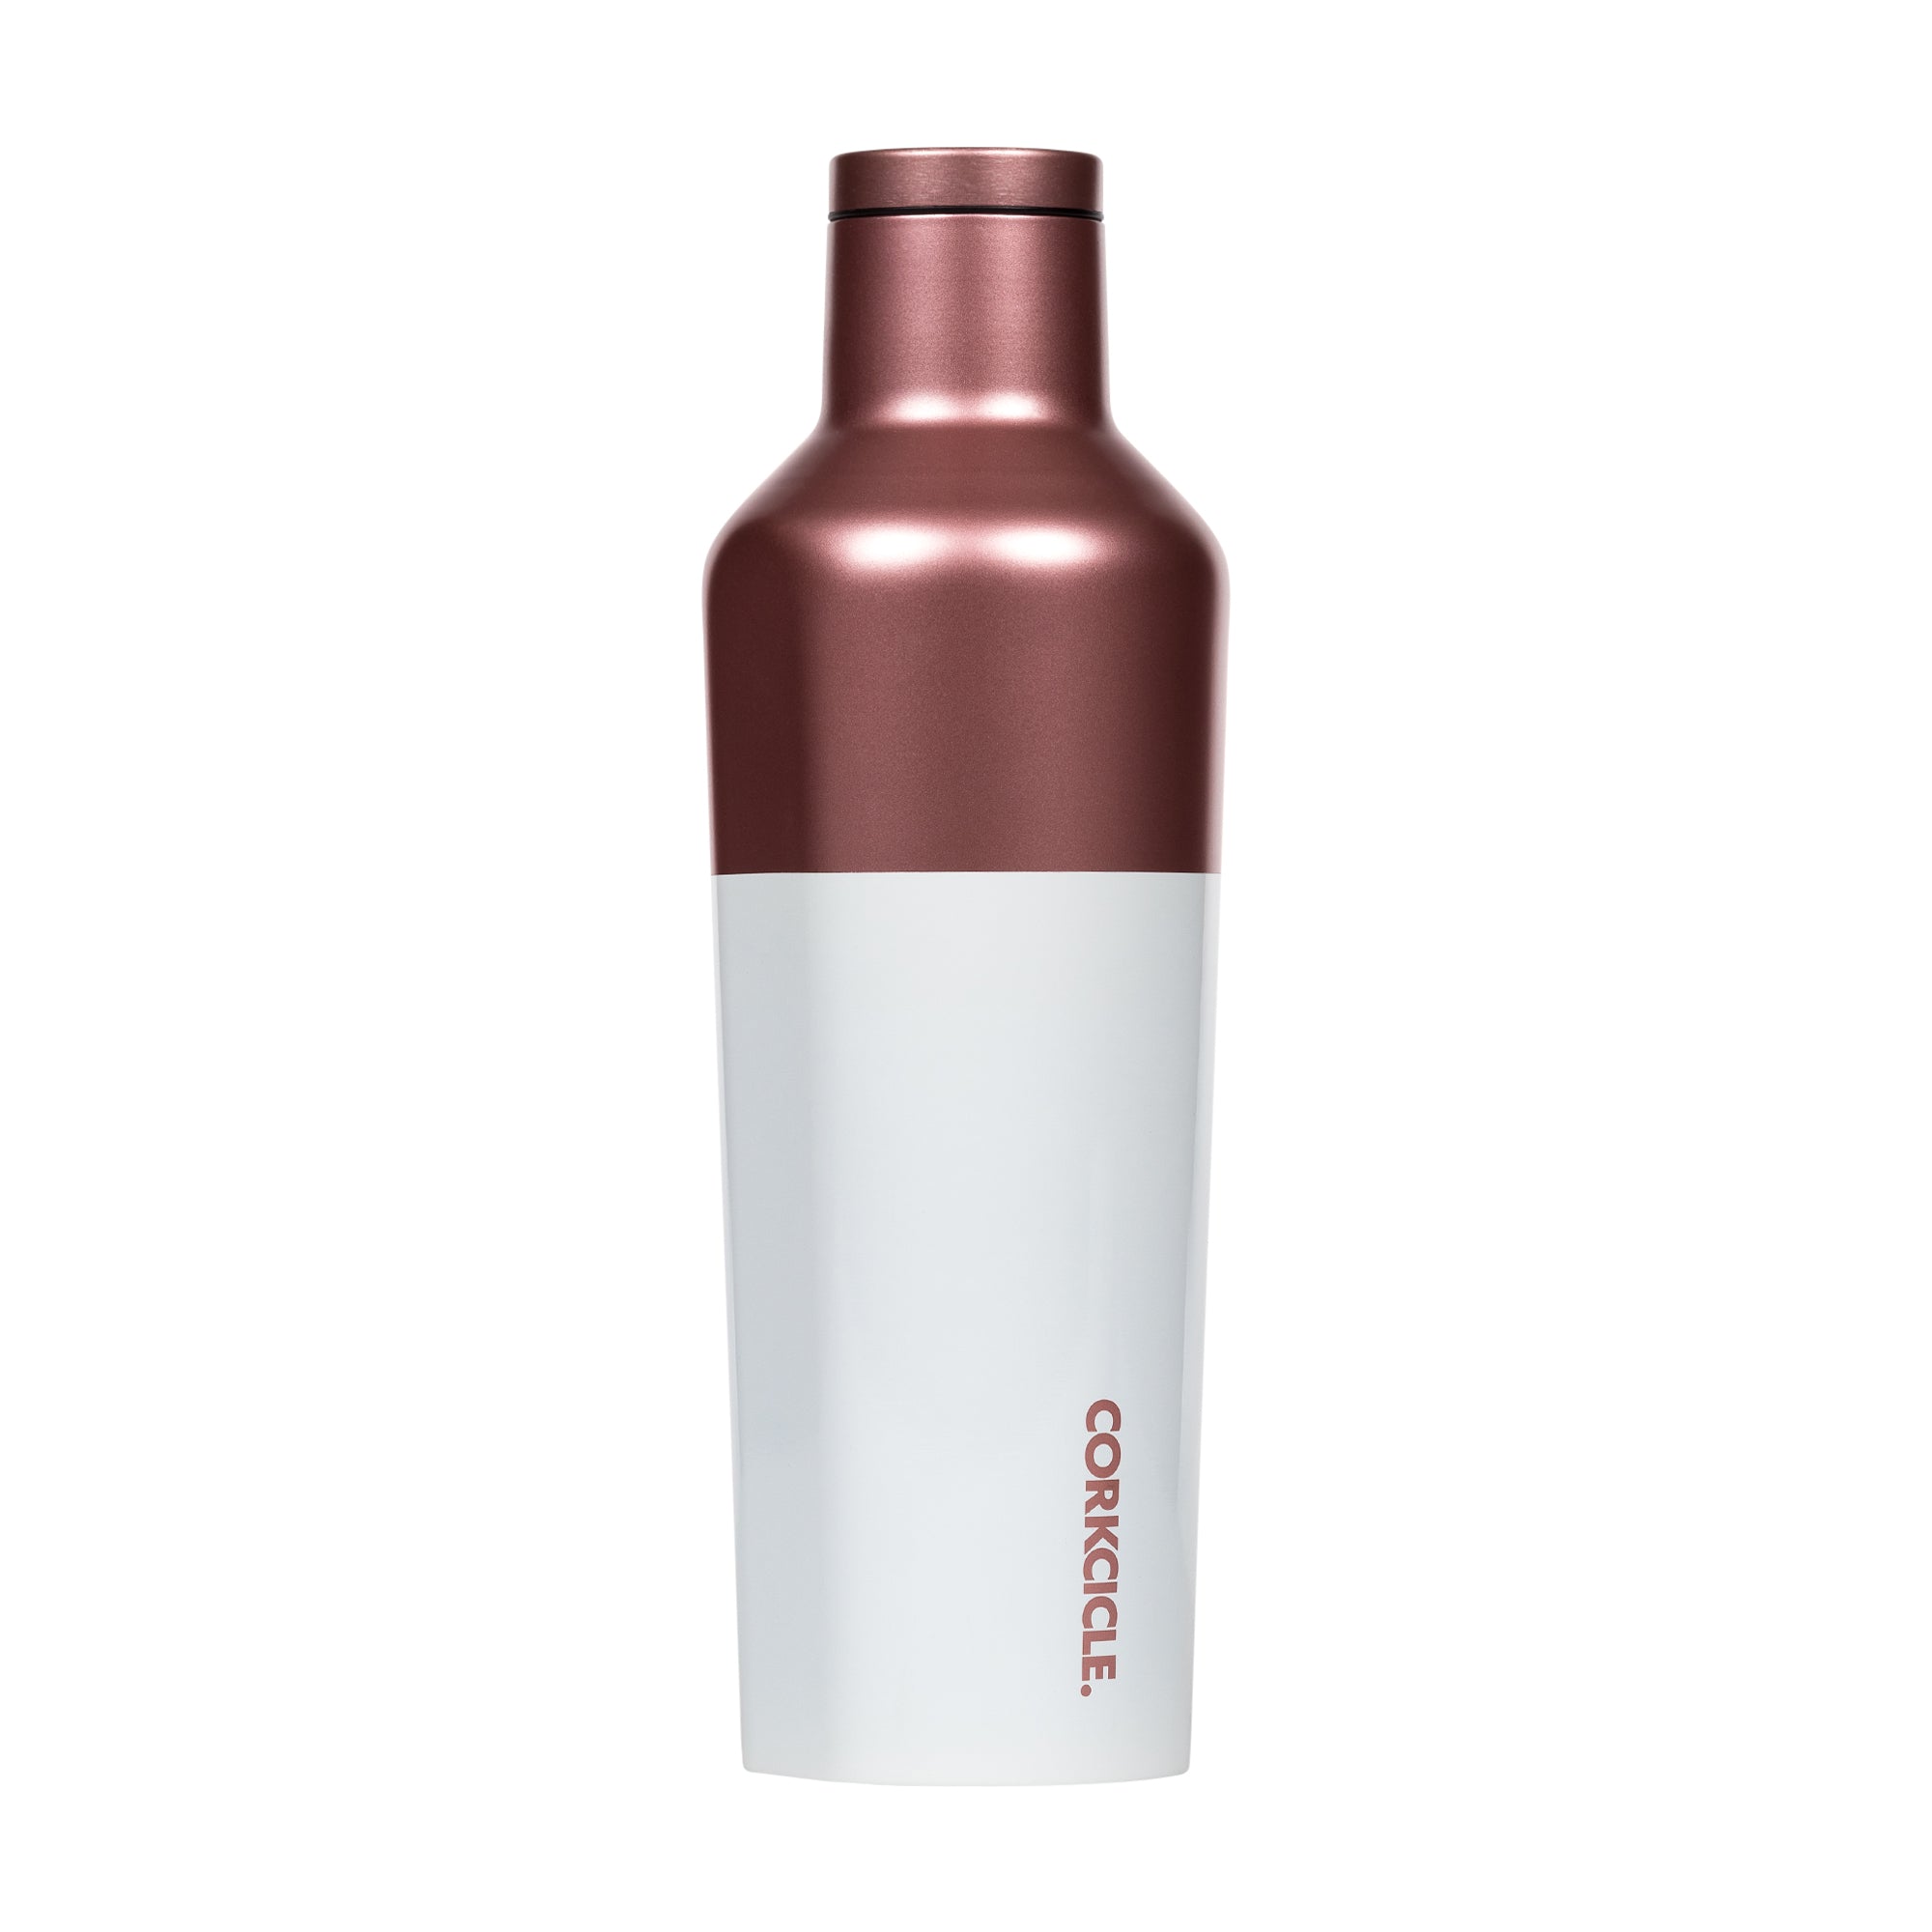 CORKCICLE *Exclusive* Stainless Steel Insulated Canteen 16oz (475ml) - Colour Block Matte Rose